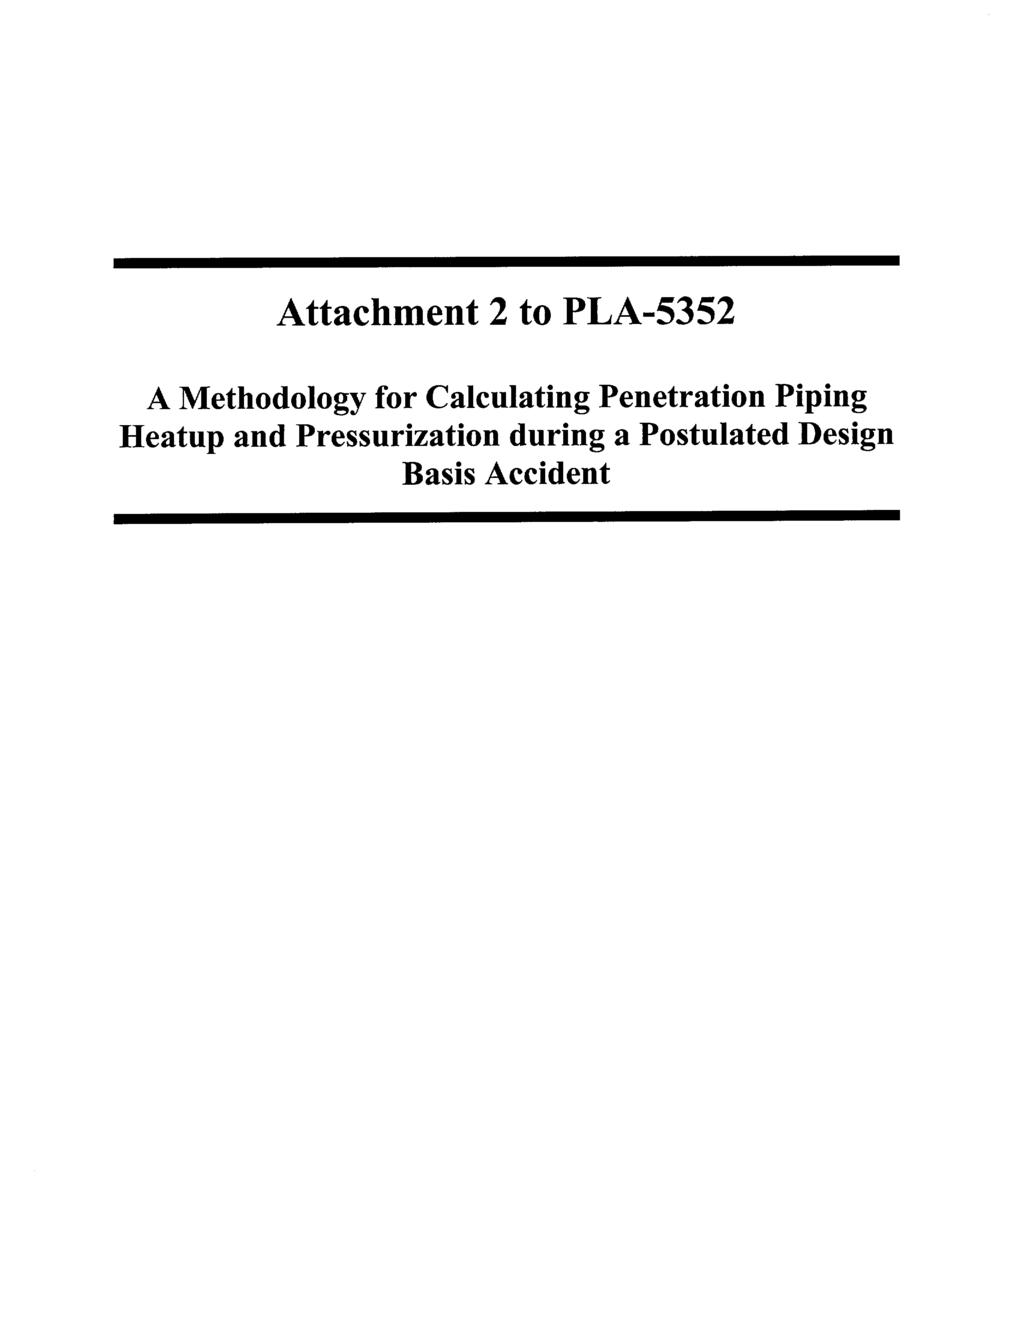 Attachment 2 to PLA-5352 A Methodology for Calculating Penetration